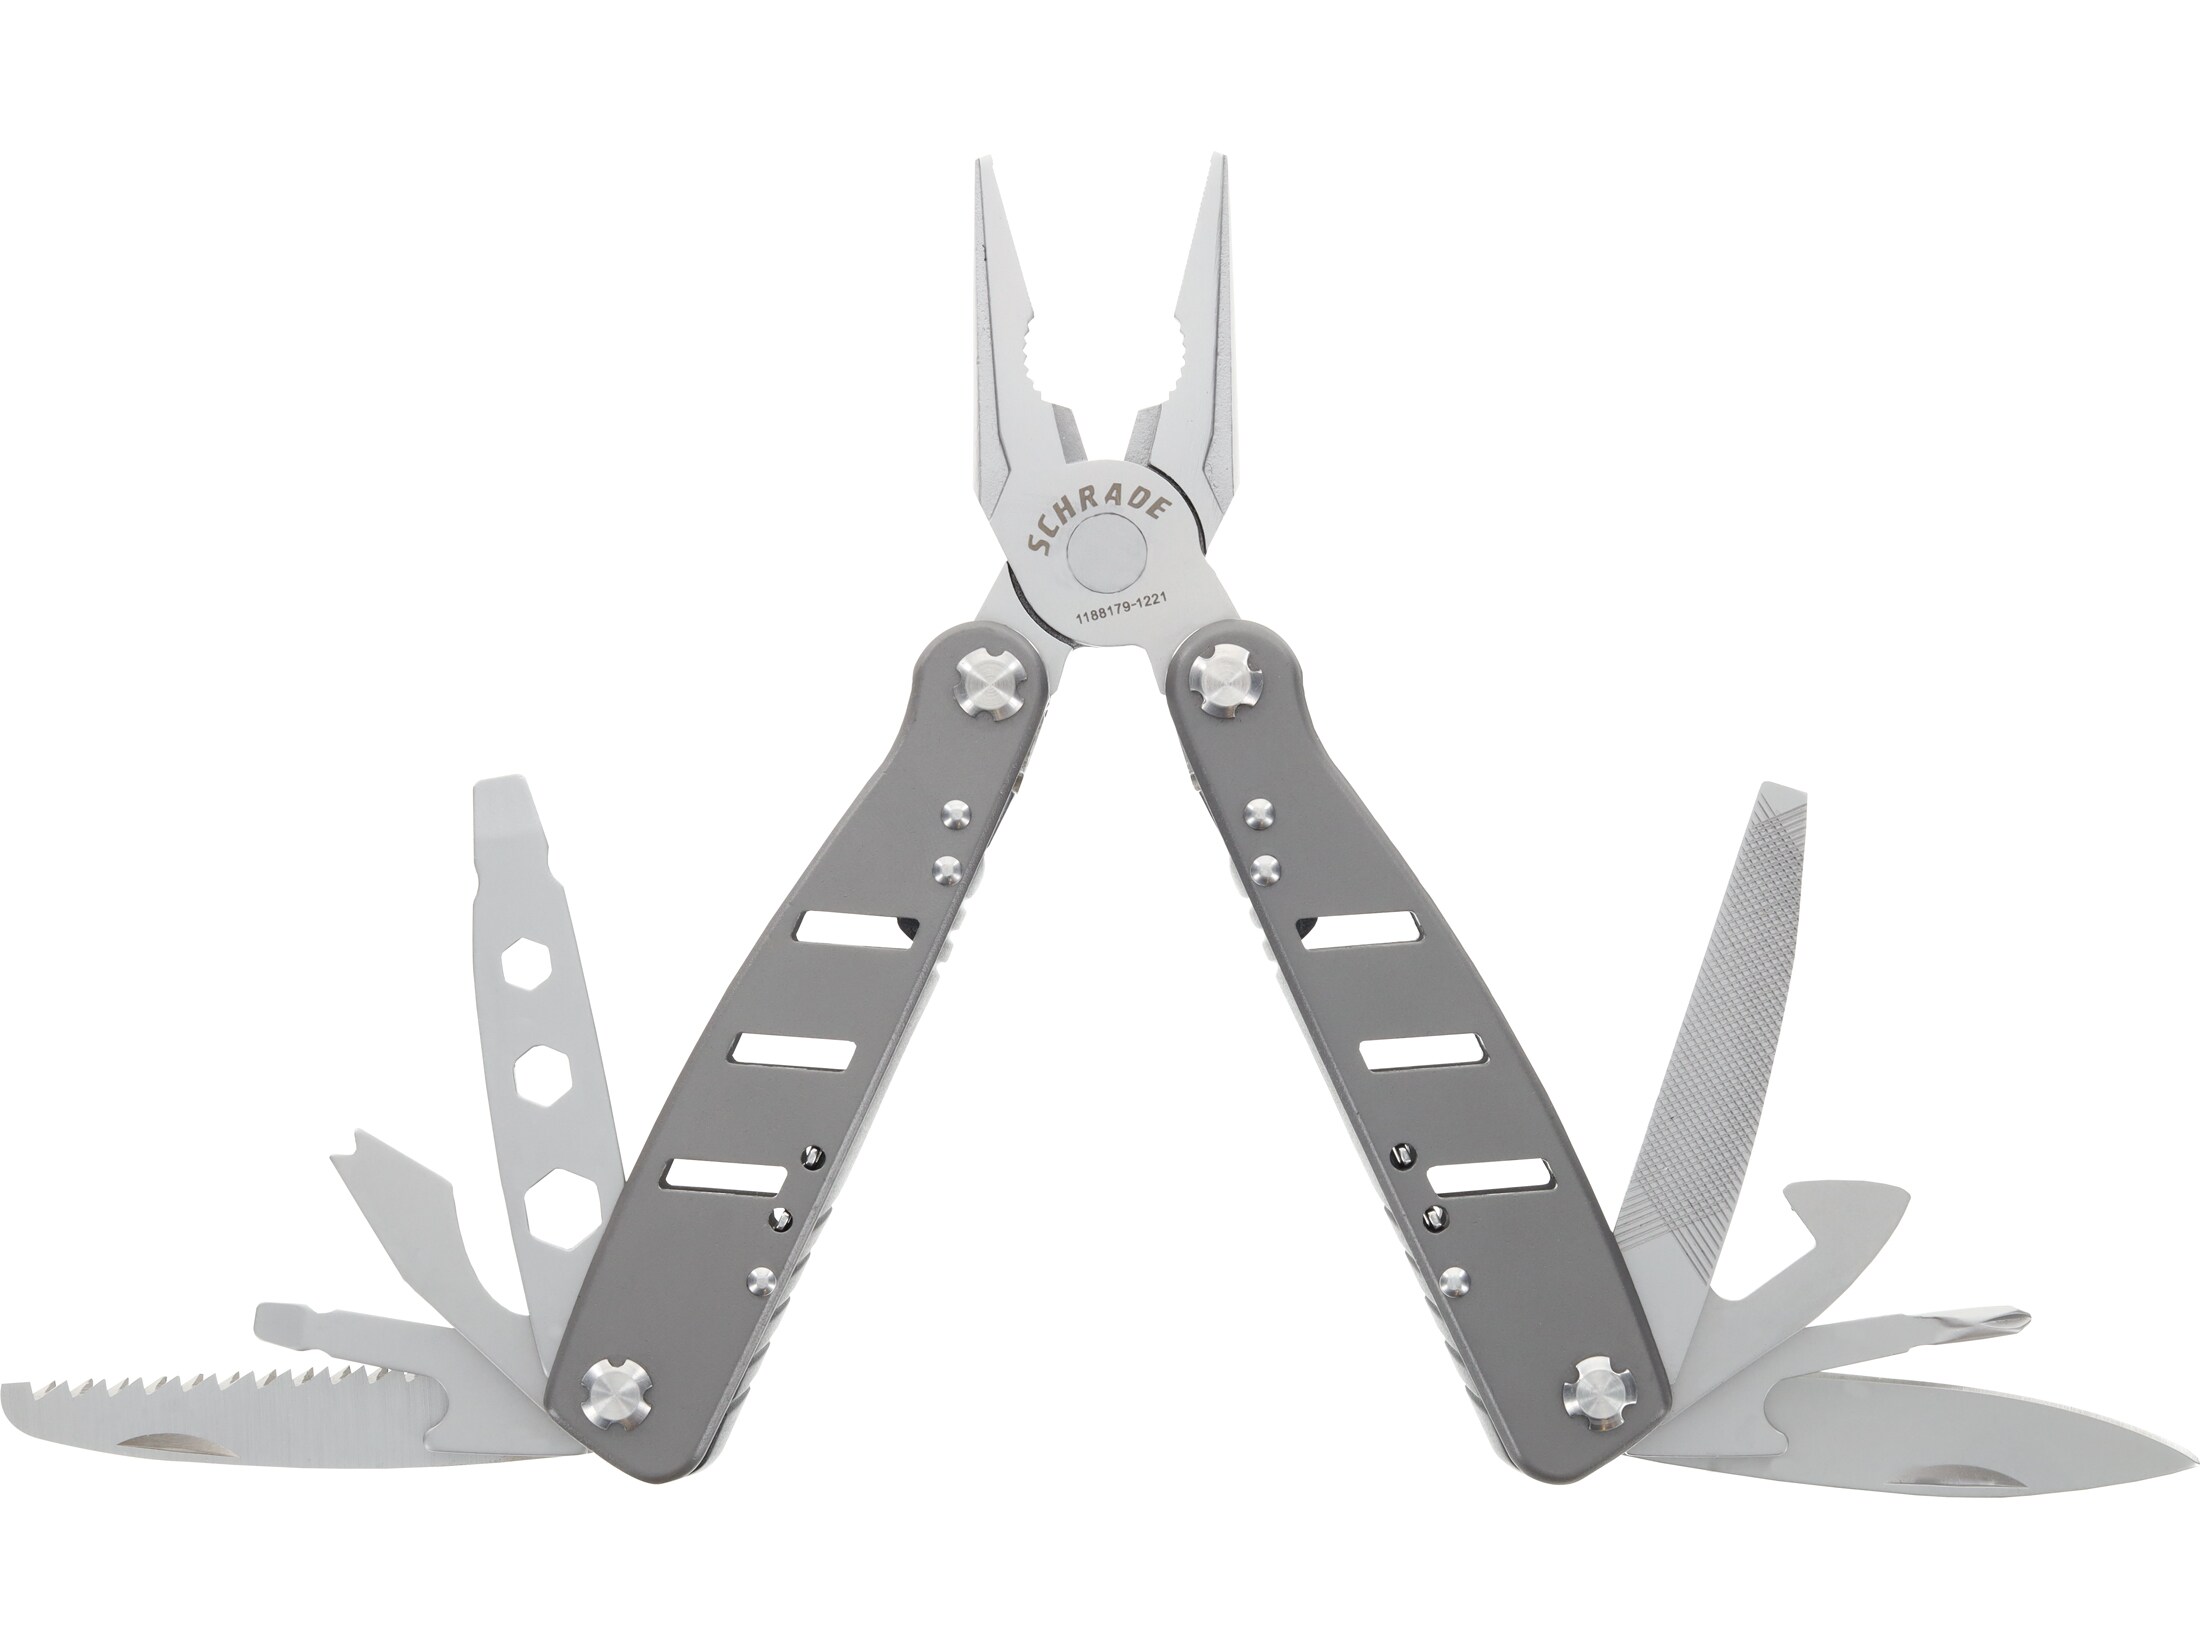 Schrade Callous Multi-Tool Stainless Gray For Sale